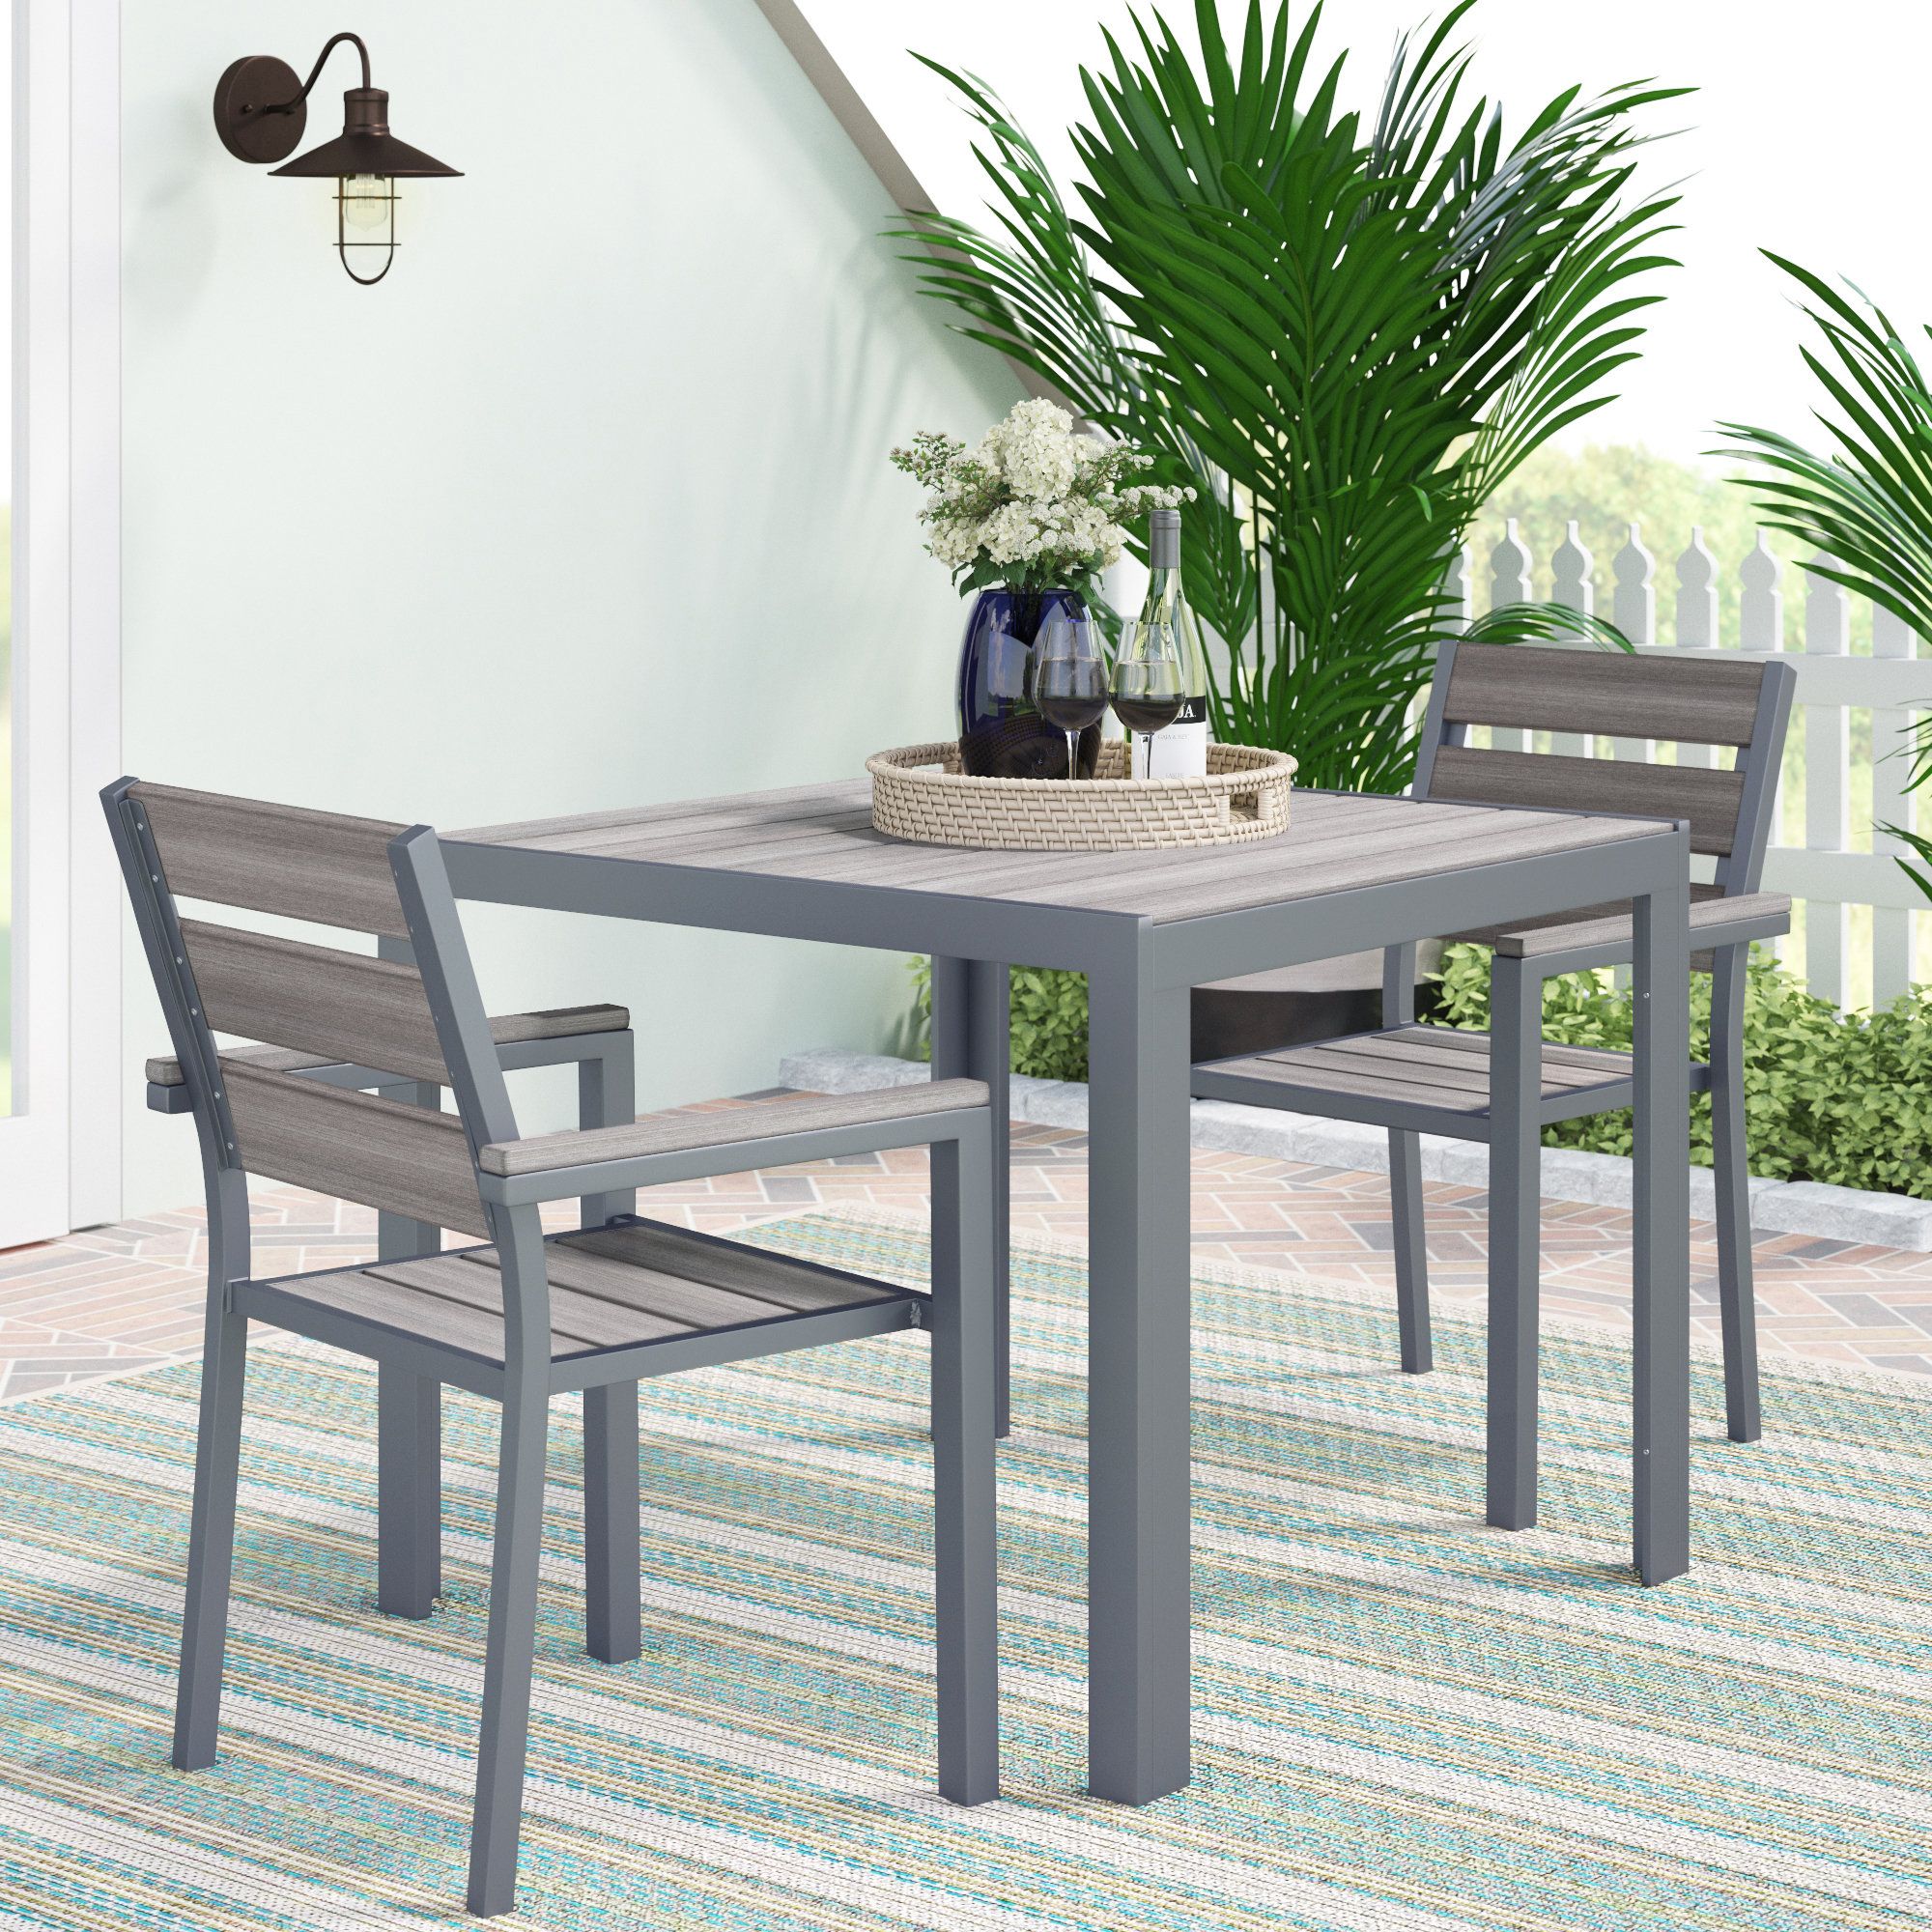 Allen 3 Piece Dining Set Inside Best And Newest Bearden 3 Piece Dining Sets (View 12 of 20)